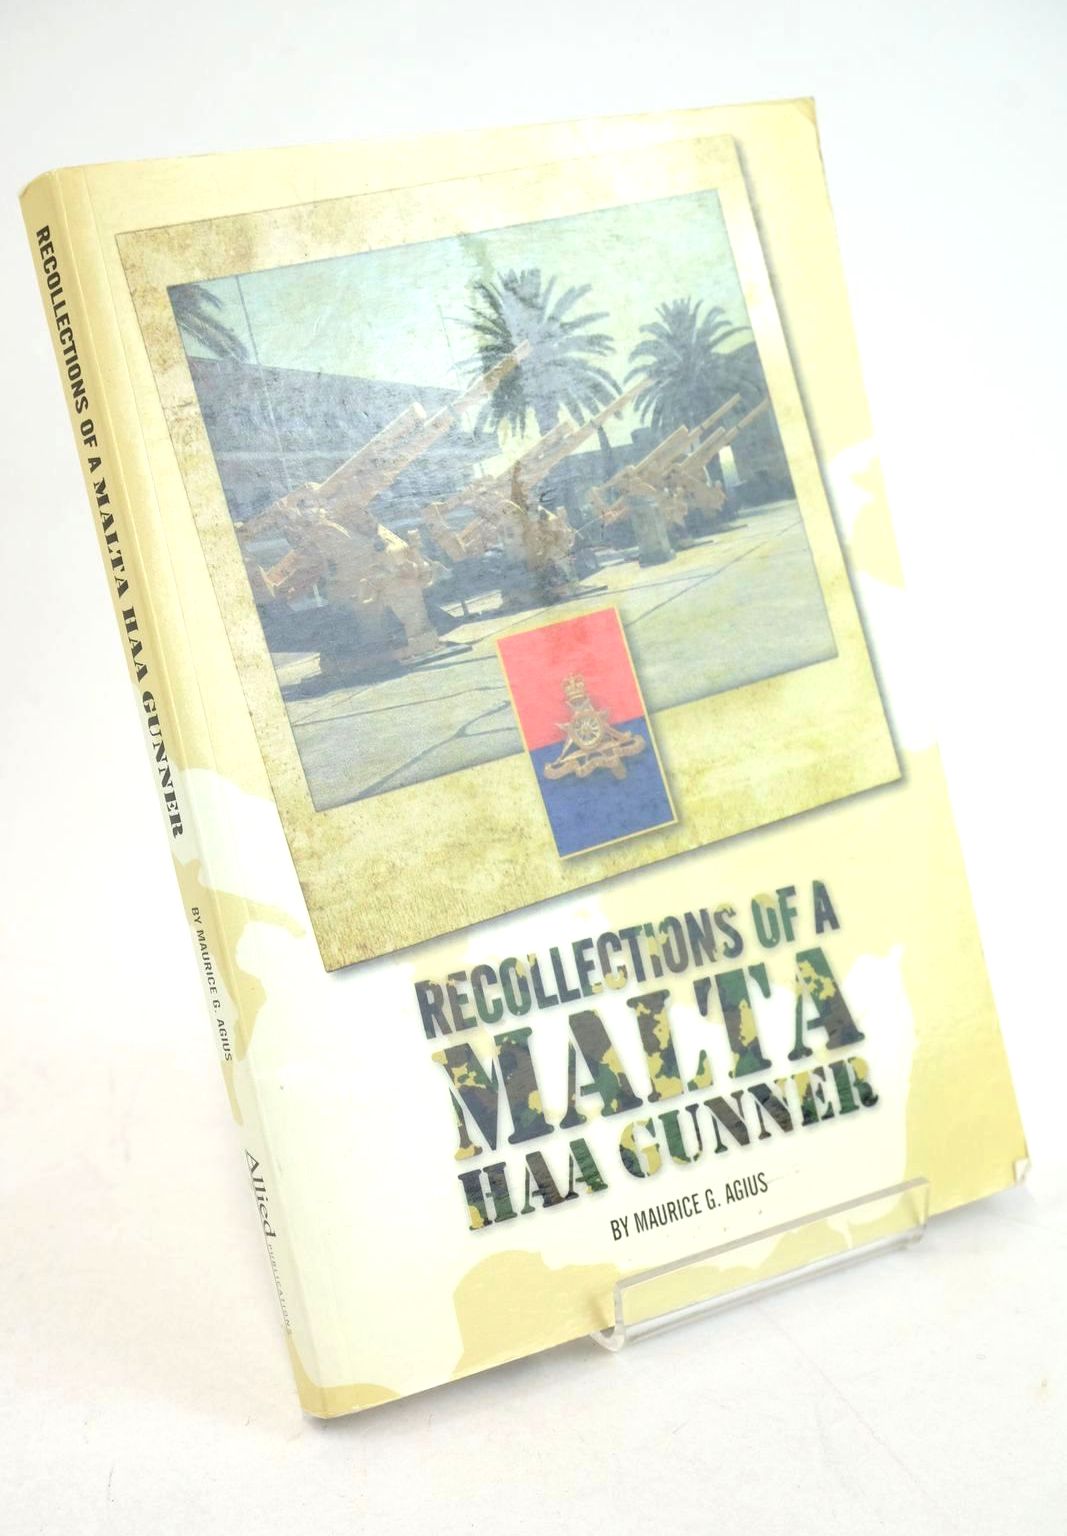 Photo of RECOLLECTIONS OF A MALTA HAA GUNNER written by Agius, Maurice G. published by Allied Publications (STOCK CODE: 1327456)  for sale by Stella & Rose's Books